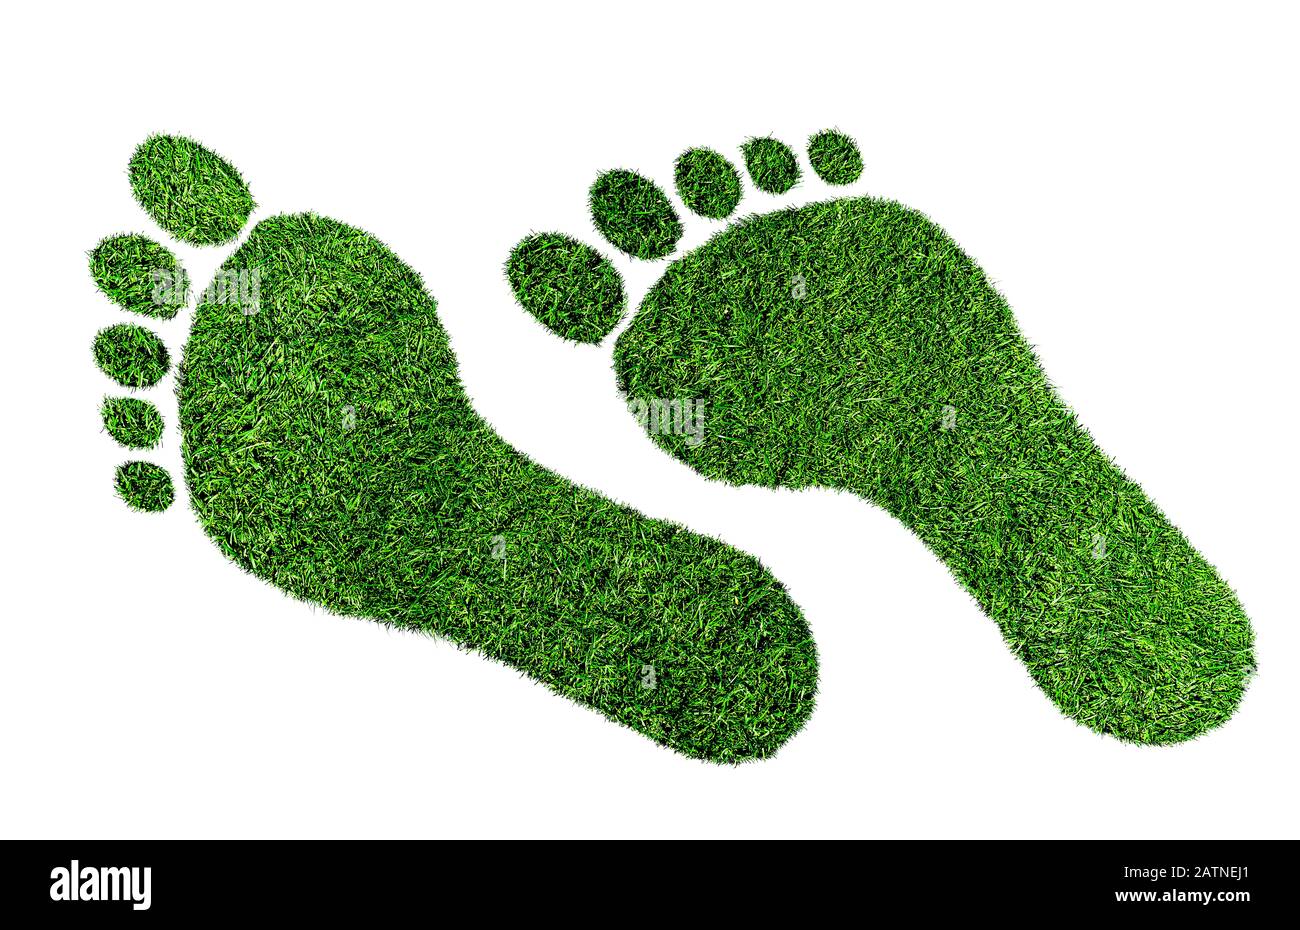 ecological footprint concept, barefoot footprint made of lush green grass isolated on white background Stock Photo